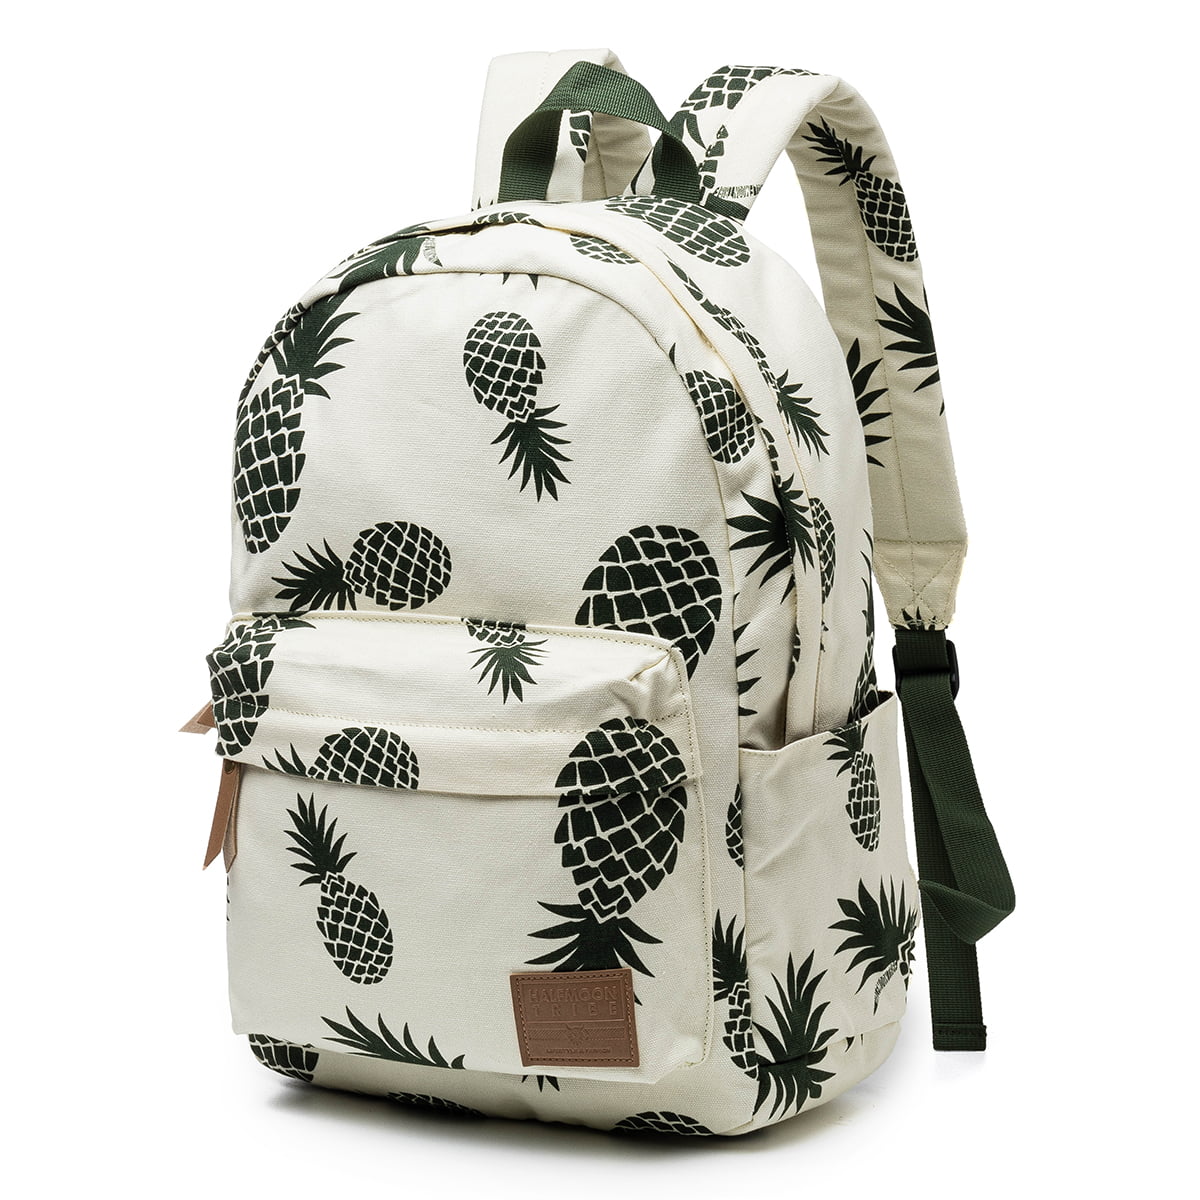 School And Traveling Fits 15.6 Inch Laptop Student Backpack Pineapple With Leaves Unisex Laptop Bag Lightweight Casual Rucksack For Commuter